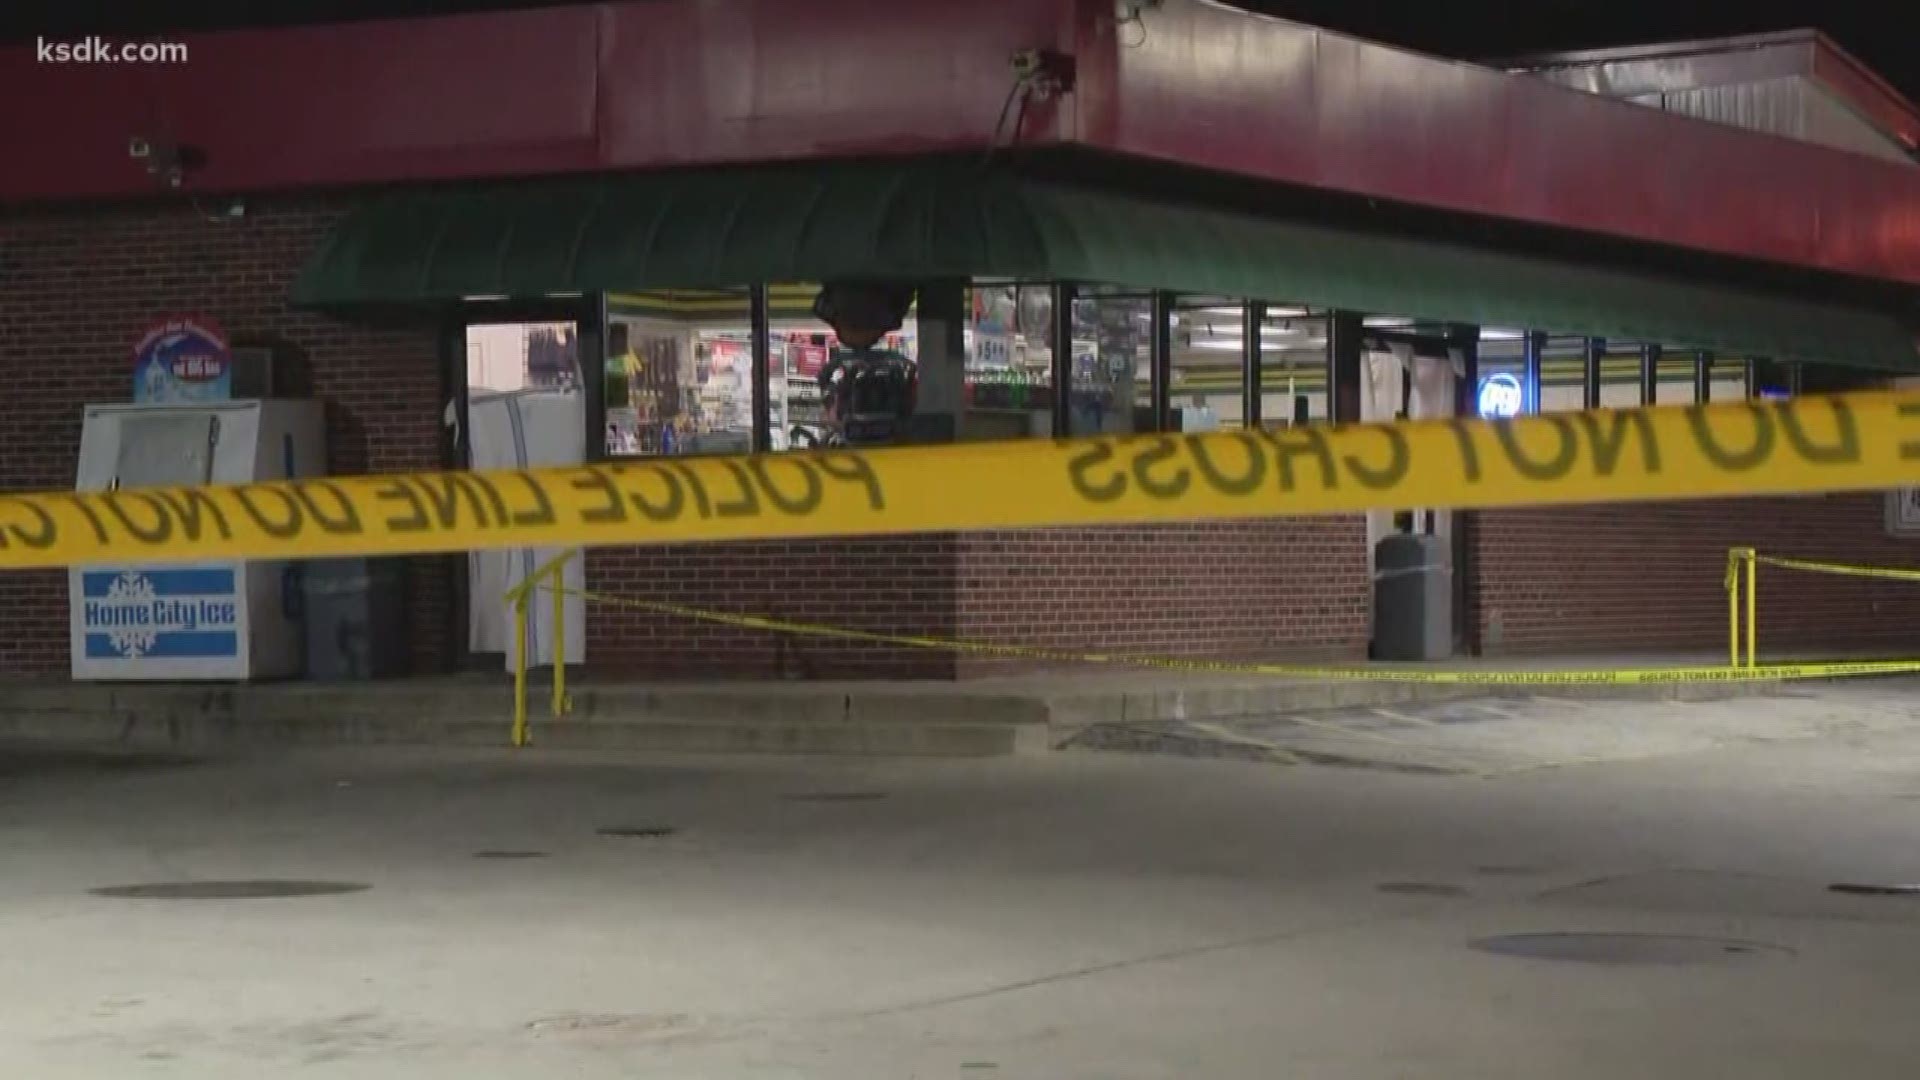 Police confirm one person is dead after a shooting at a Shell gas station in Alton.